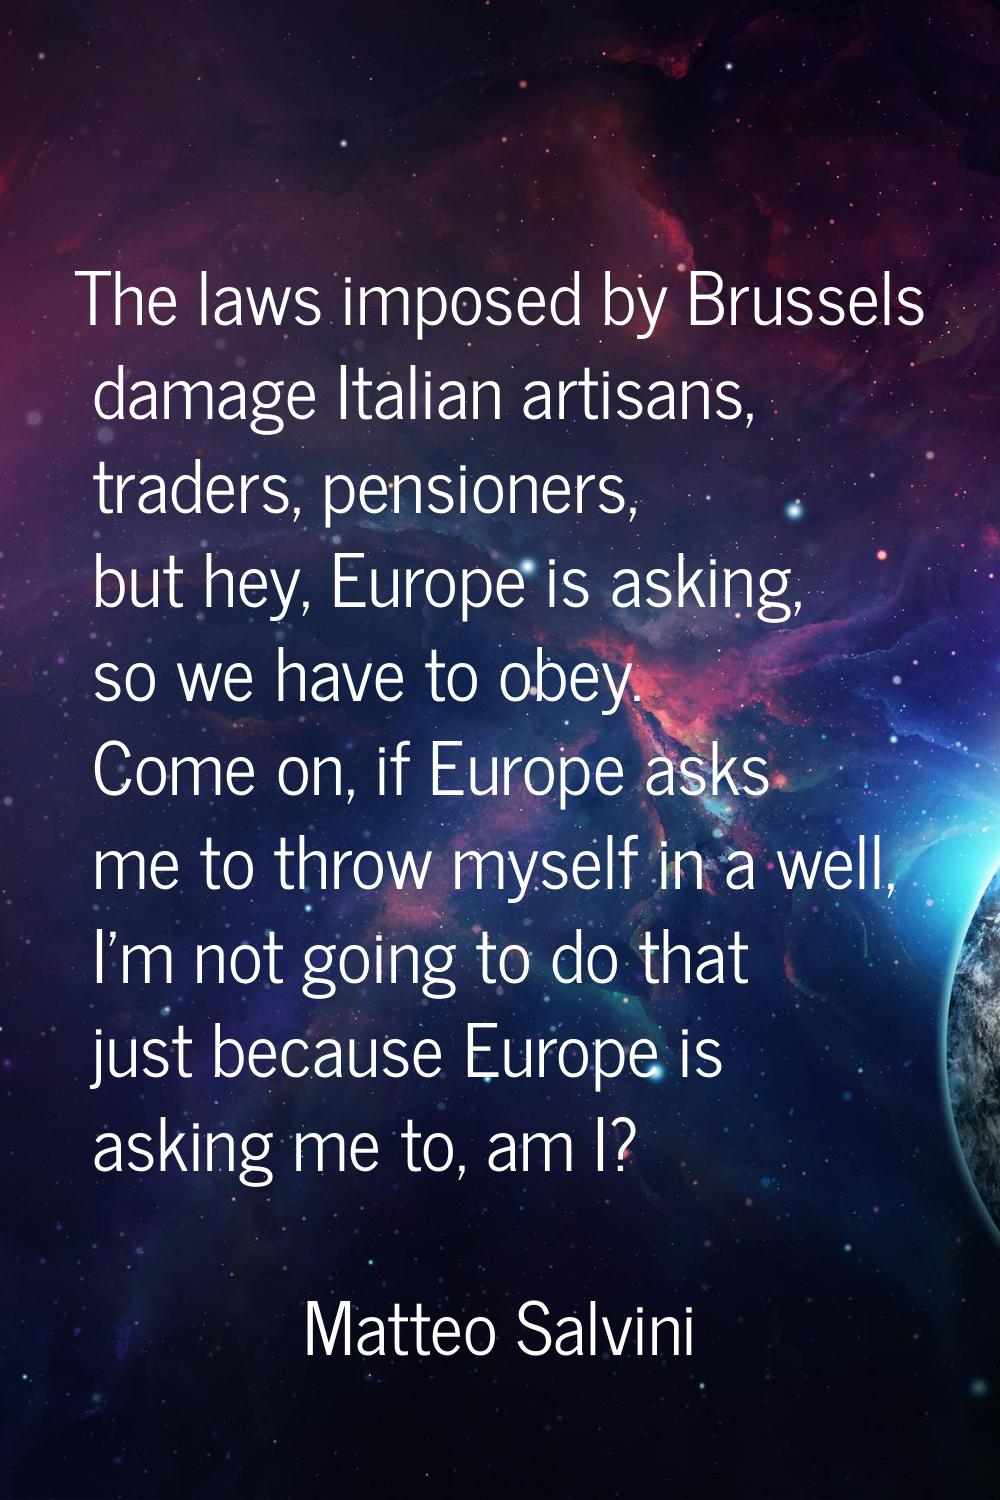 The laws imposed by Brussels damage Italian artisans, traders, pensioners, but hey, Europe is askin